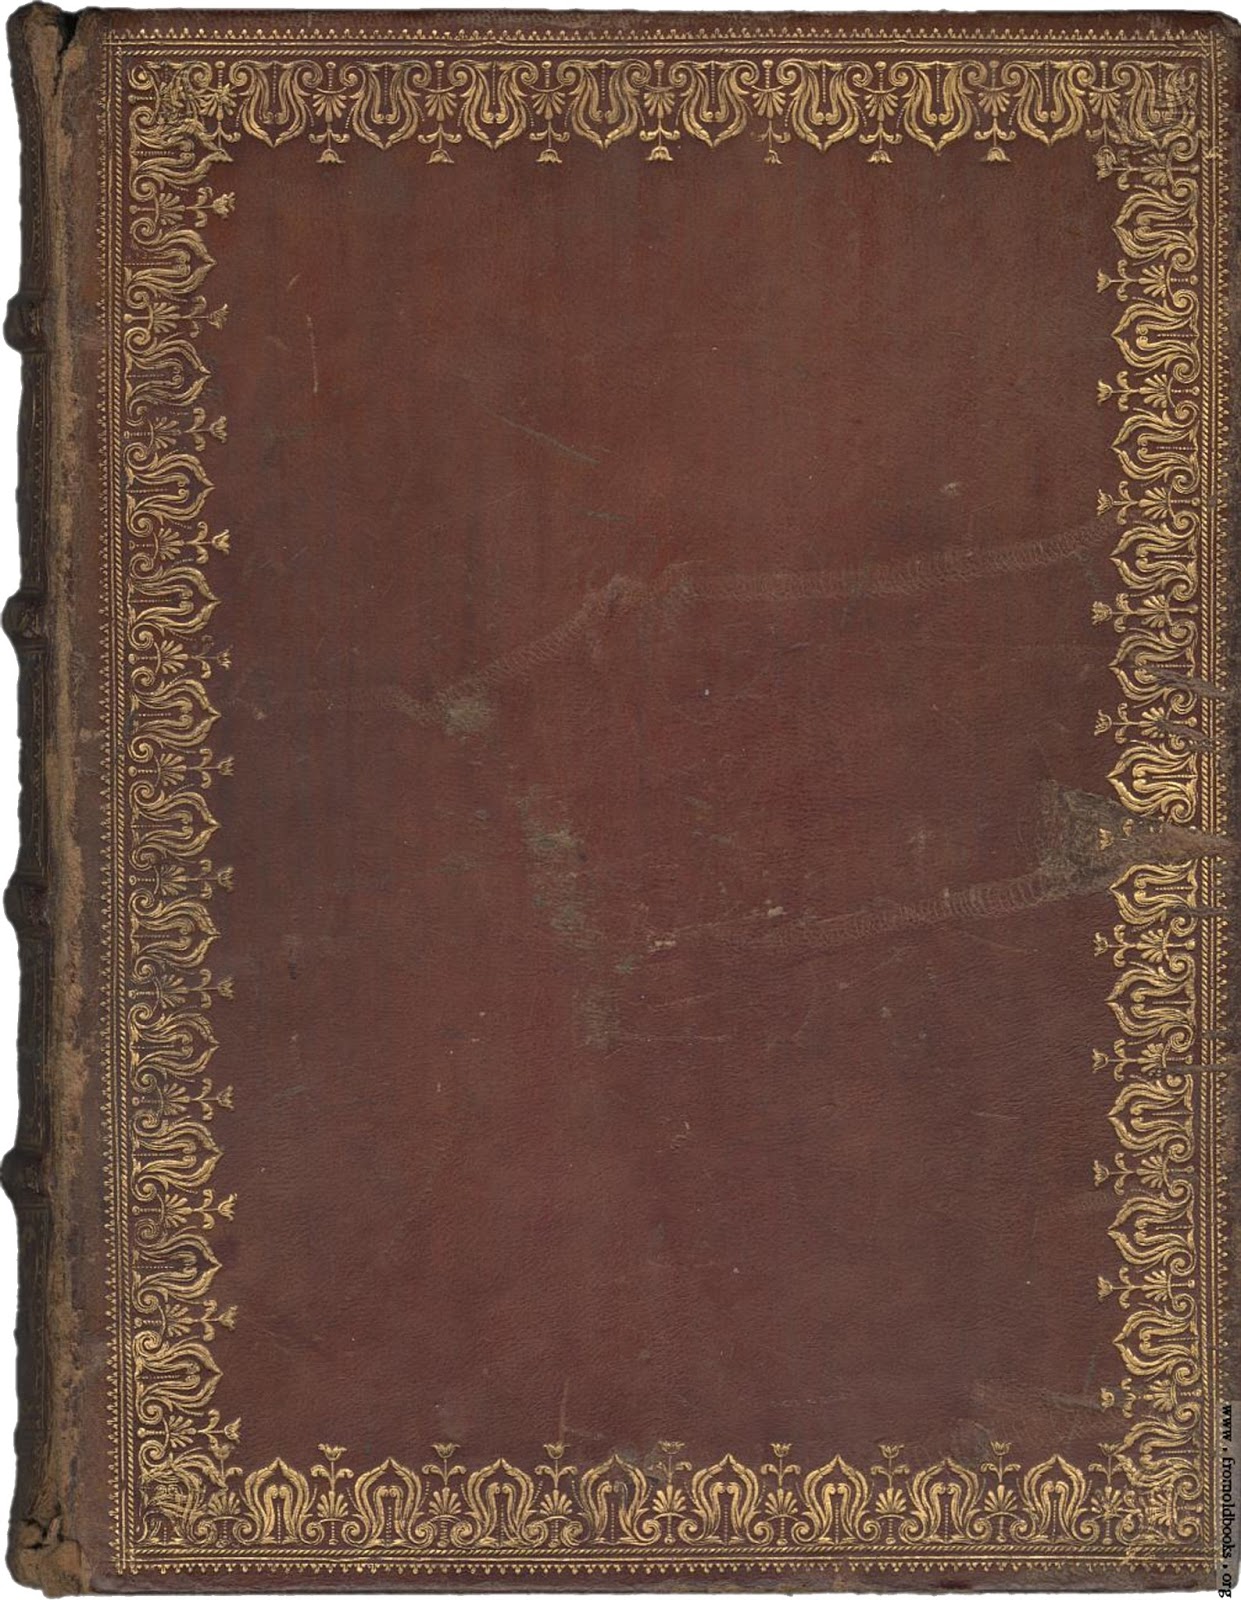 book cover wallpaper,brown,leather,book,rectangle,antique